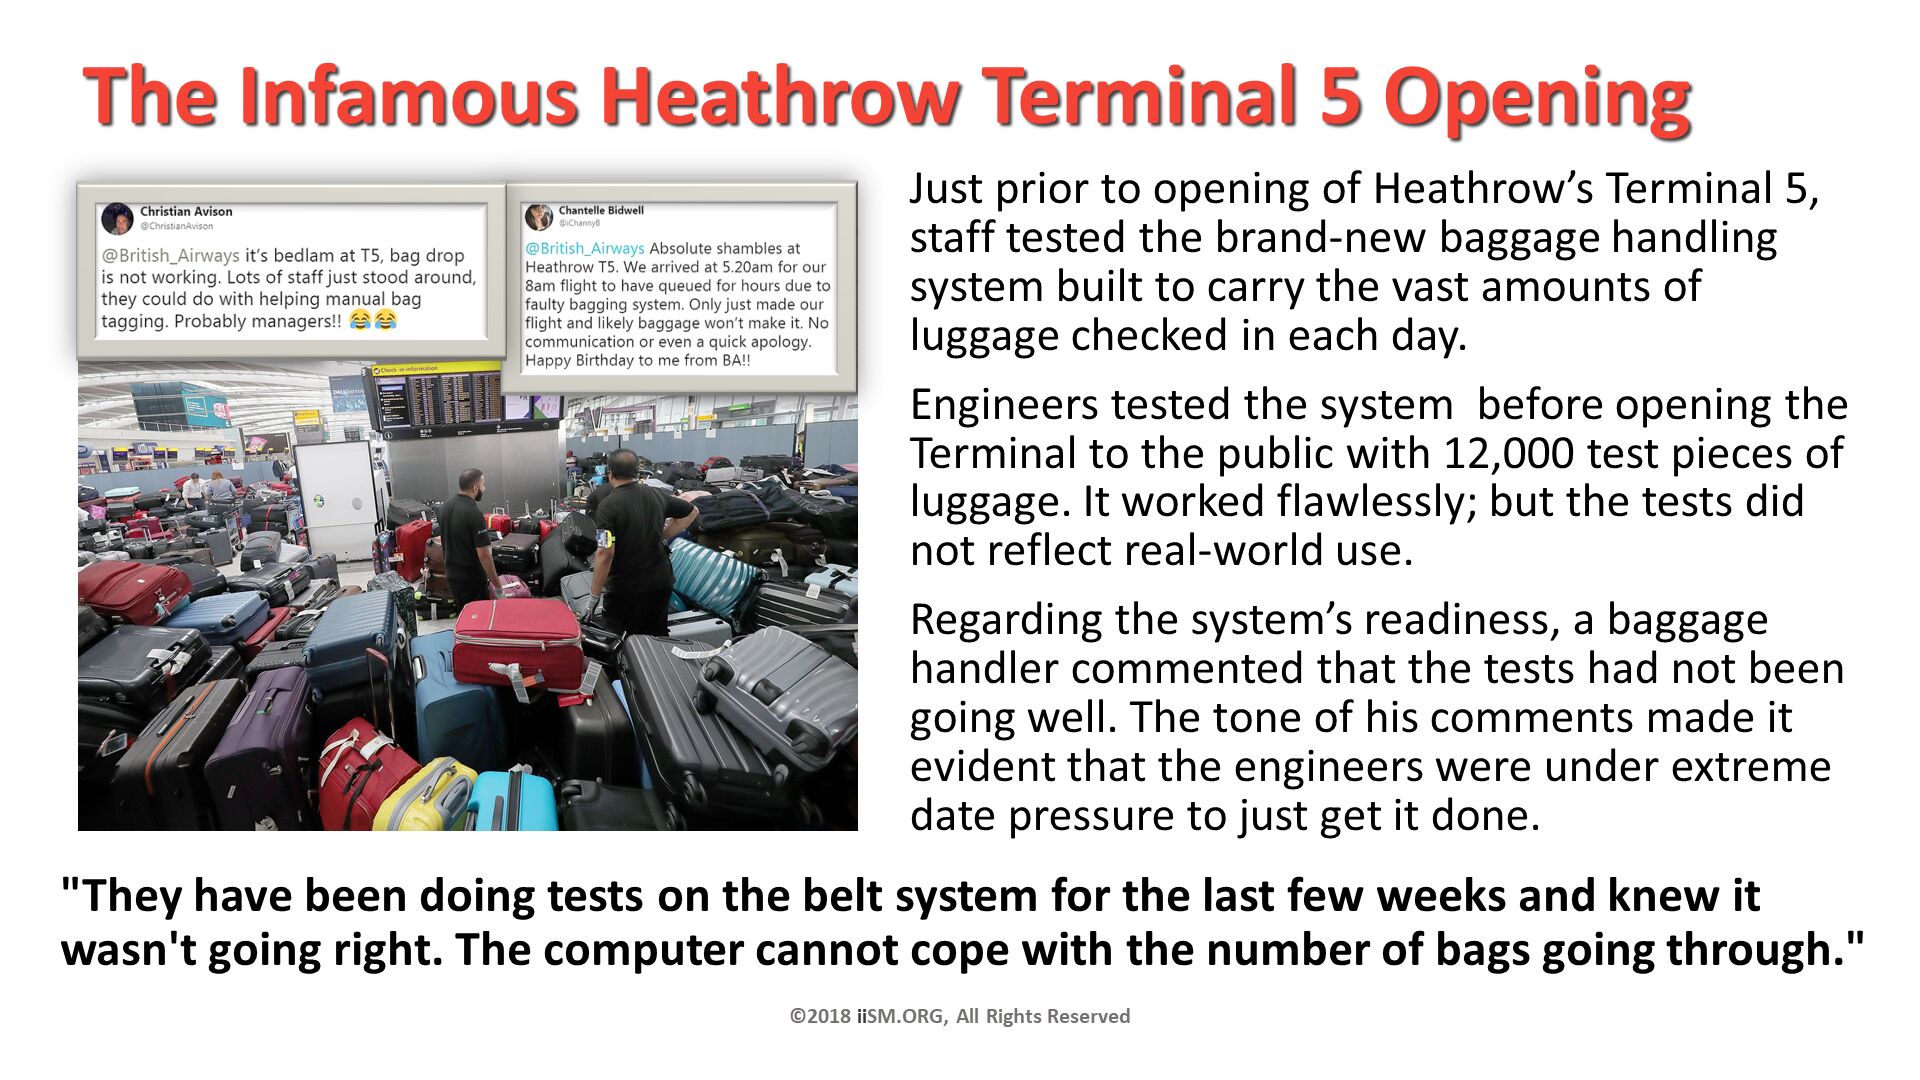 The Infamous Heathrow Terminal 5 Opening. Just prior to opening of Heathrow’s Terminal 5,staff tested the brand-new baggage handling system built to carry the vast amounts of luggage checked in each day. 
Engineers tested the system  before opening the Terminal to the public with 12,000 test pieces of luggage. It worked flawlessly; but the tests did not reflect real-world use.
Regarding the system’s readiness, a baggage handler commented that the tests had not been going well. The tone of his comments made it evident that the engineers were under extreme date pressure to just get it done. ©2018 iiSM.ORG, All Rights Reserved. "They have been doing tests on the belt system for the last few weeks and knew it wasn't going right. The computer cannot cope with the number of bags going through.". 